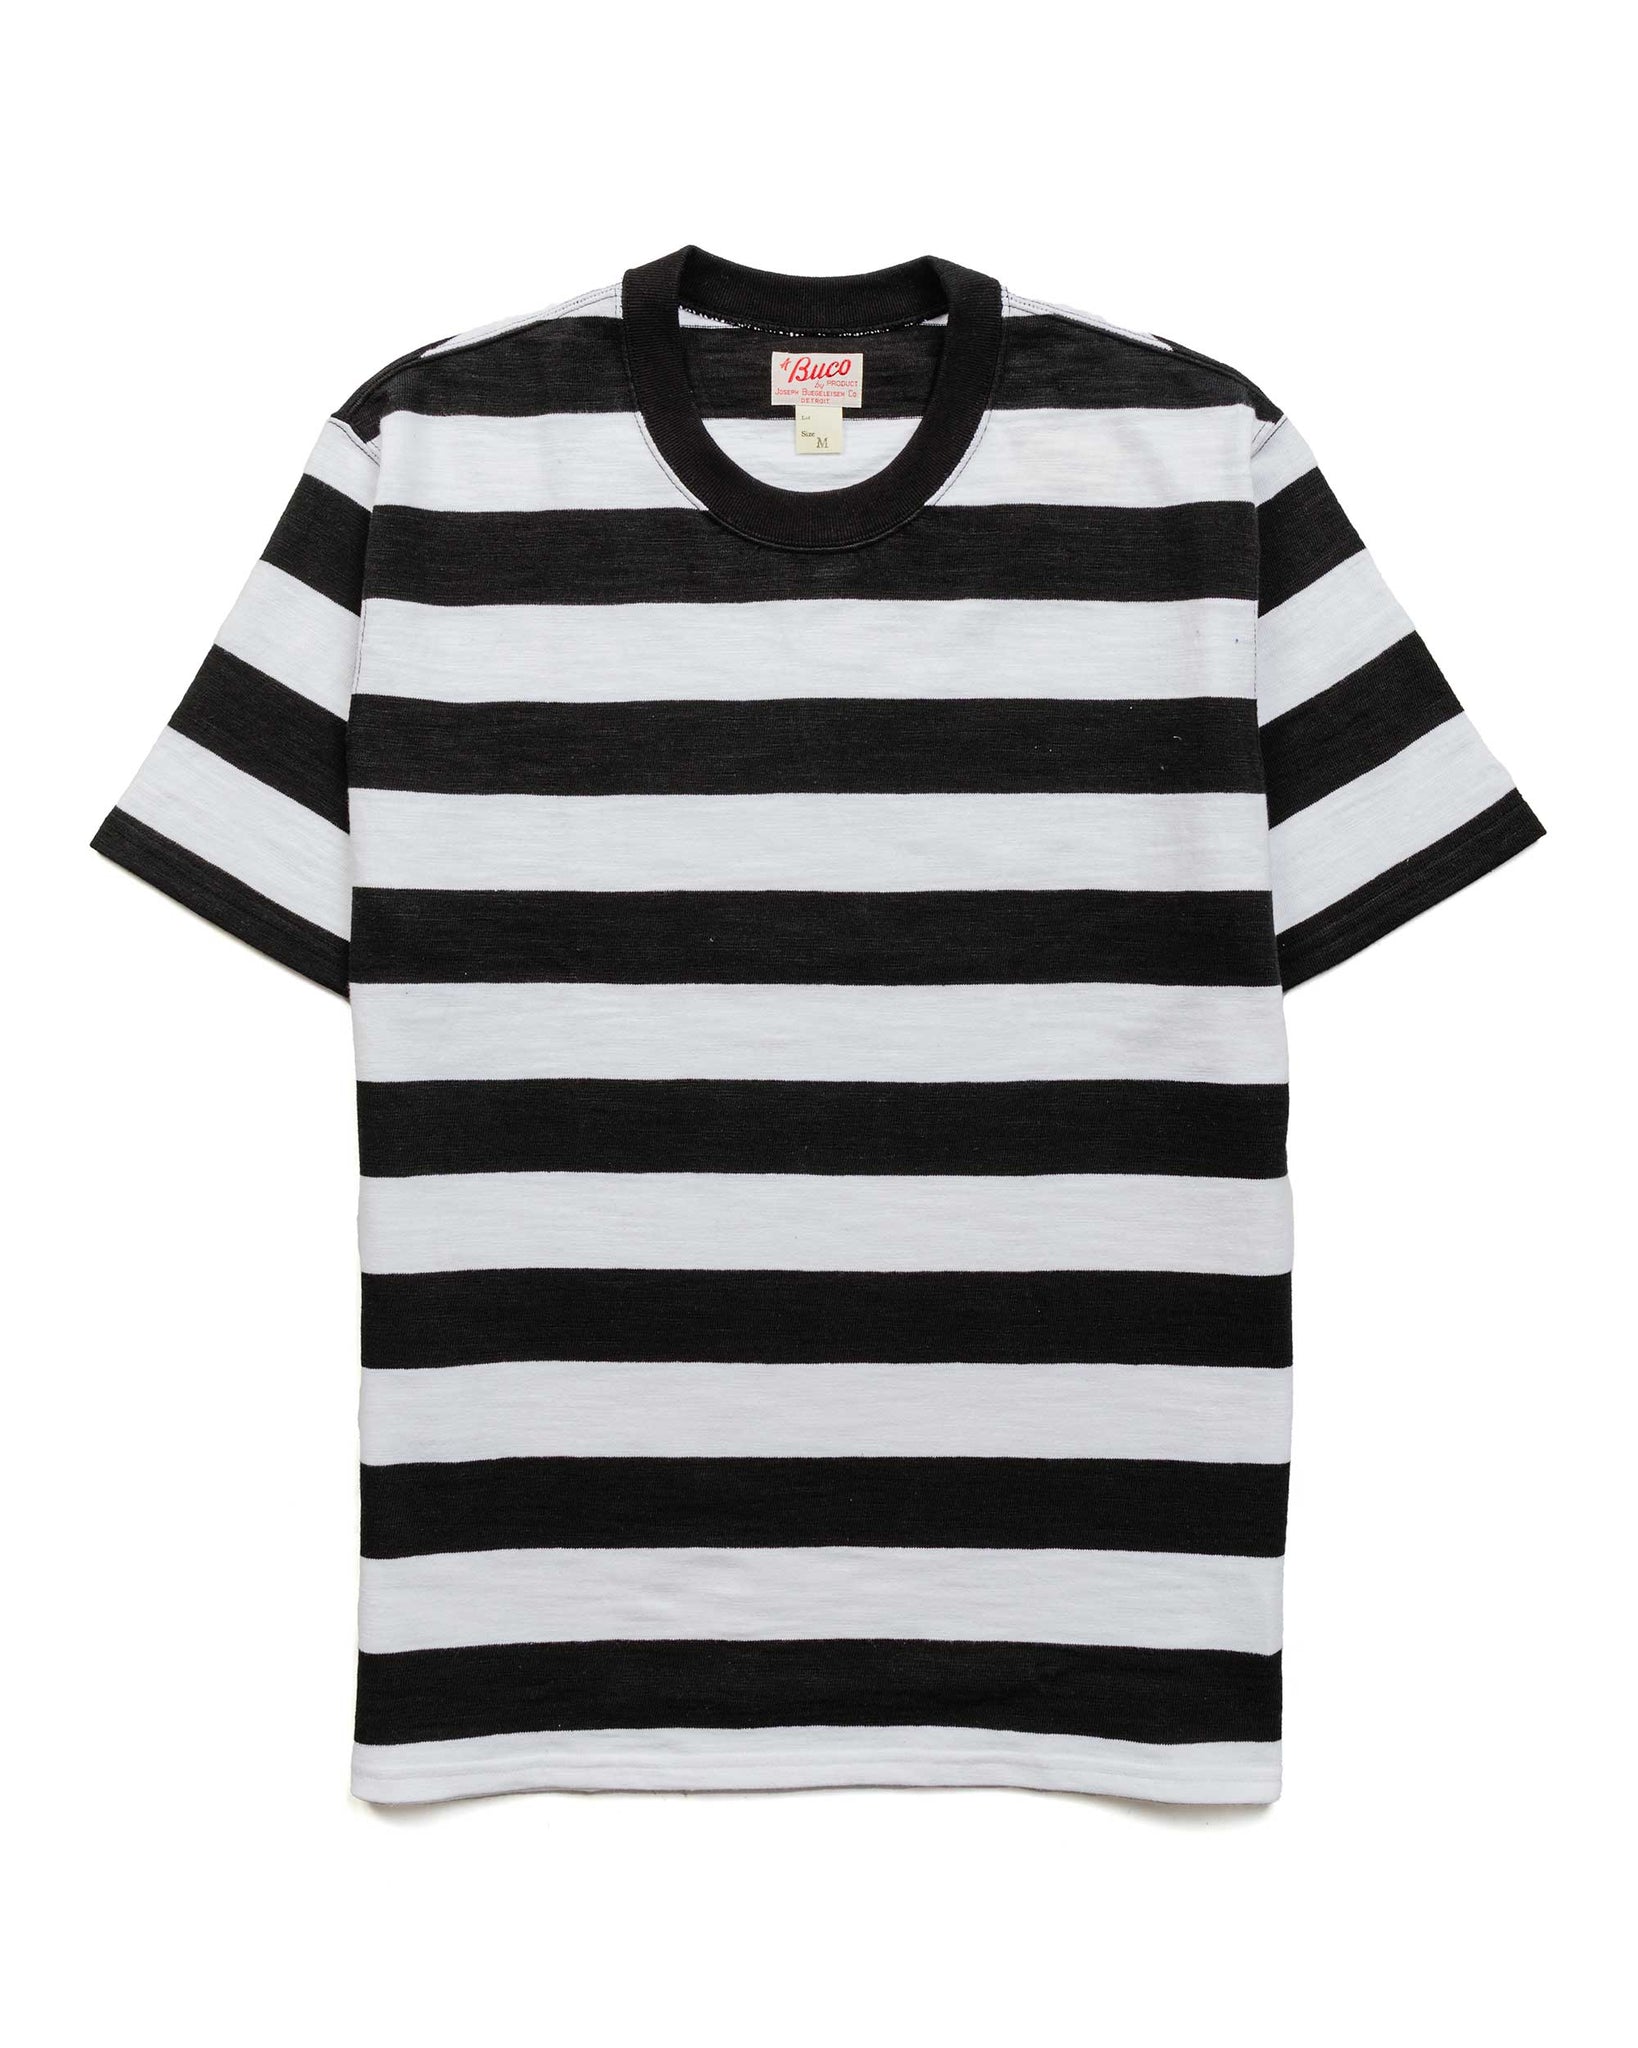 The Real McCoy's BC20007 Buco Stripe Tee S/S White